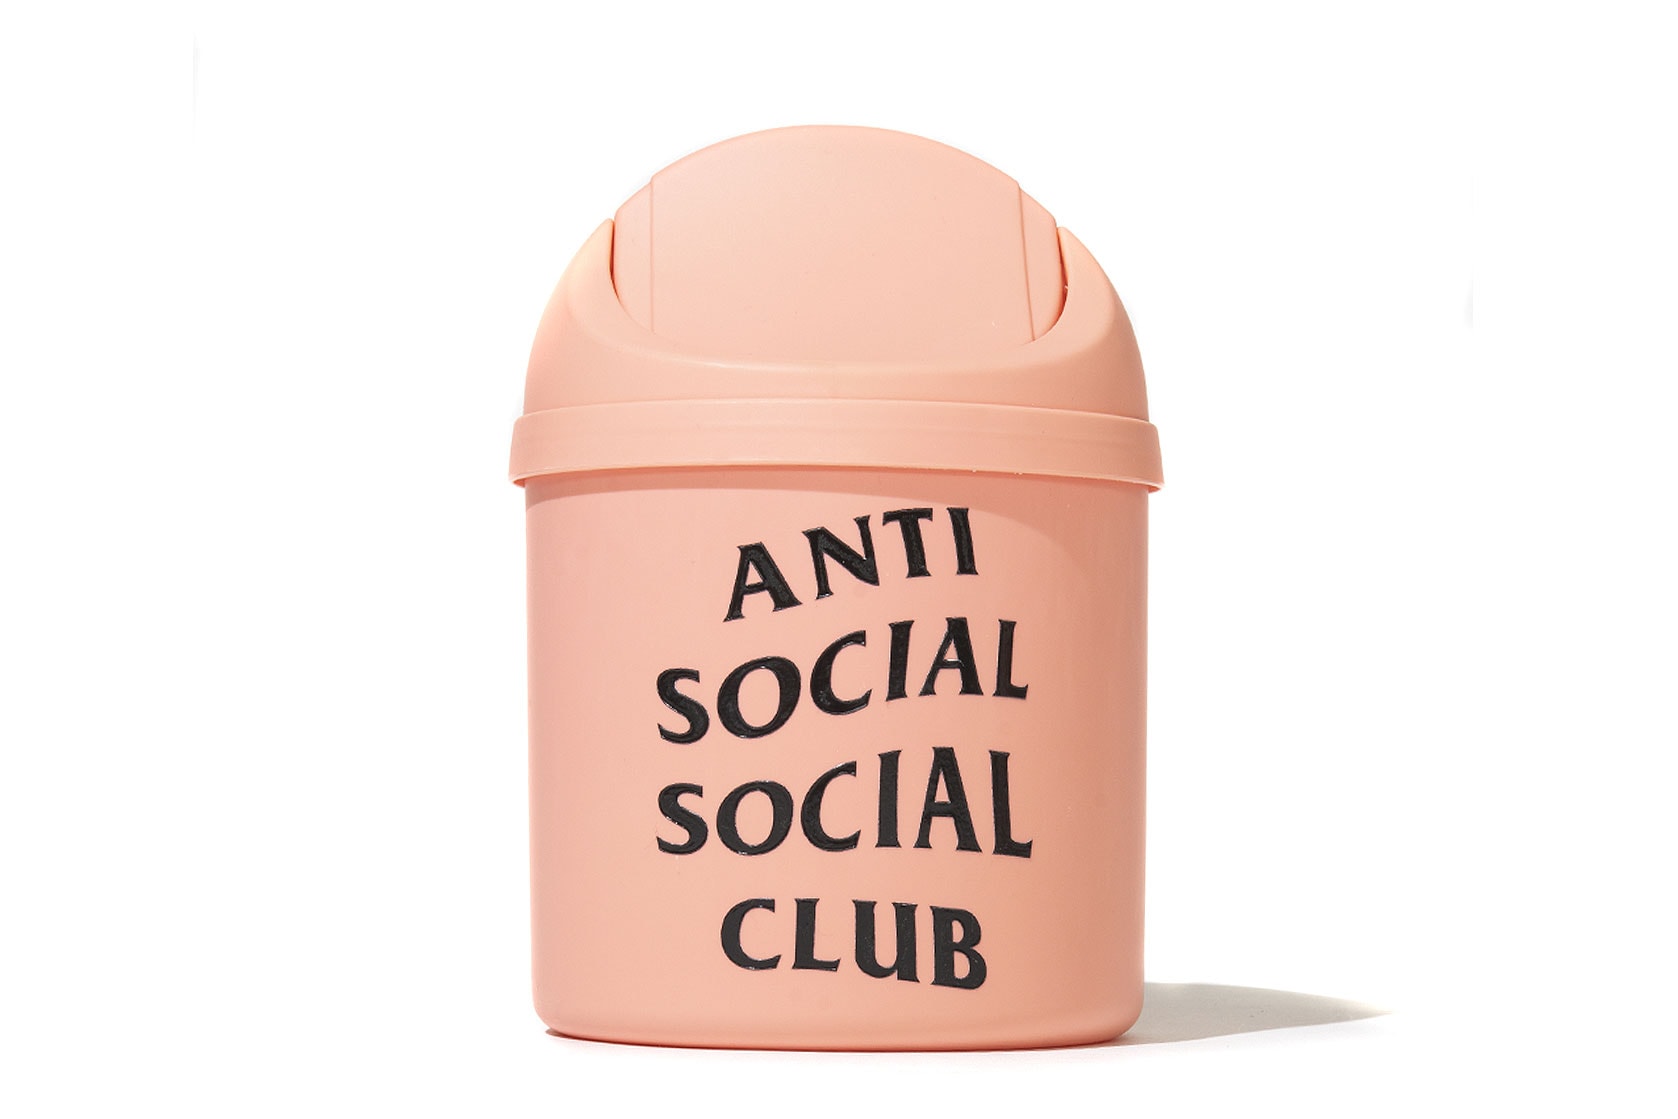 Anti Social Social Club FW19 Accessory Collection fall winter 2019 release trash cans tenga frisbee